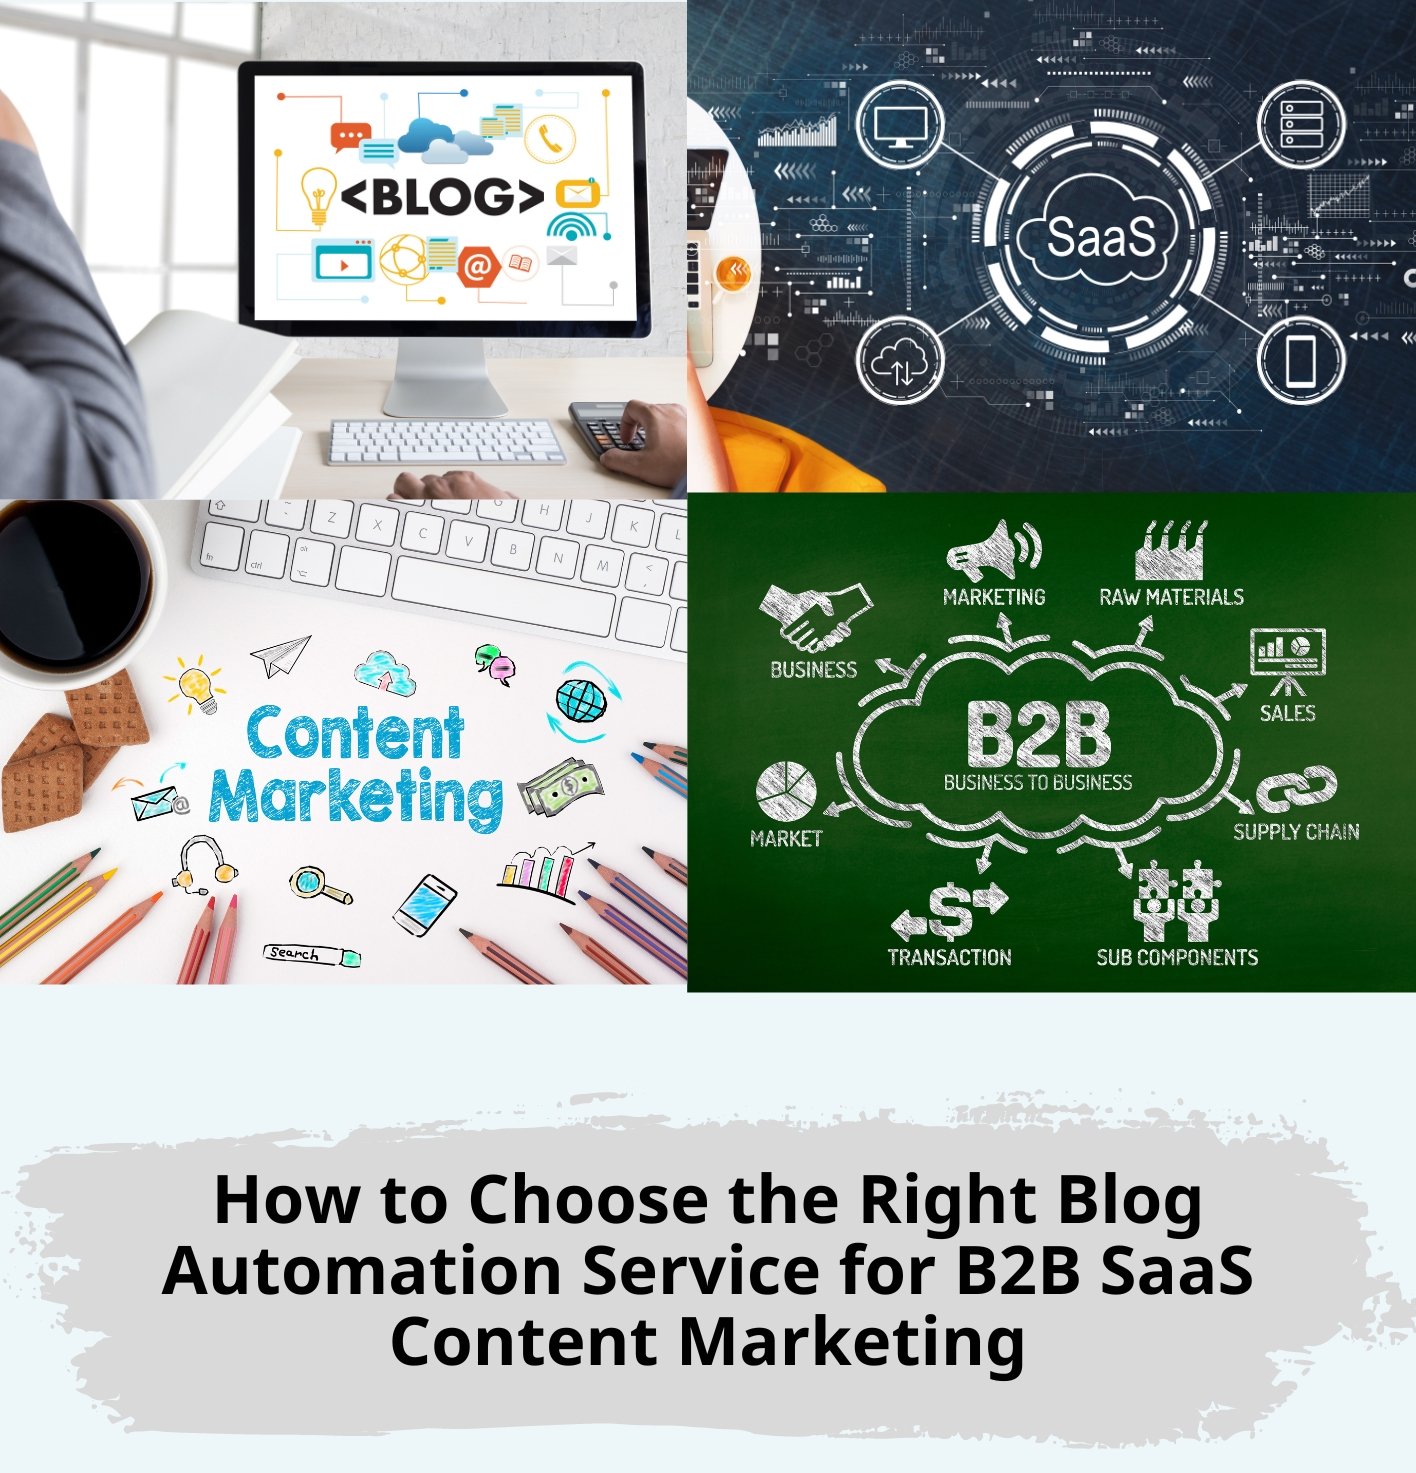 How to Choose the Right Blog Automation Service for B2B SaaS Content Marketing